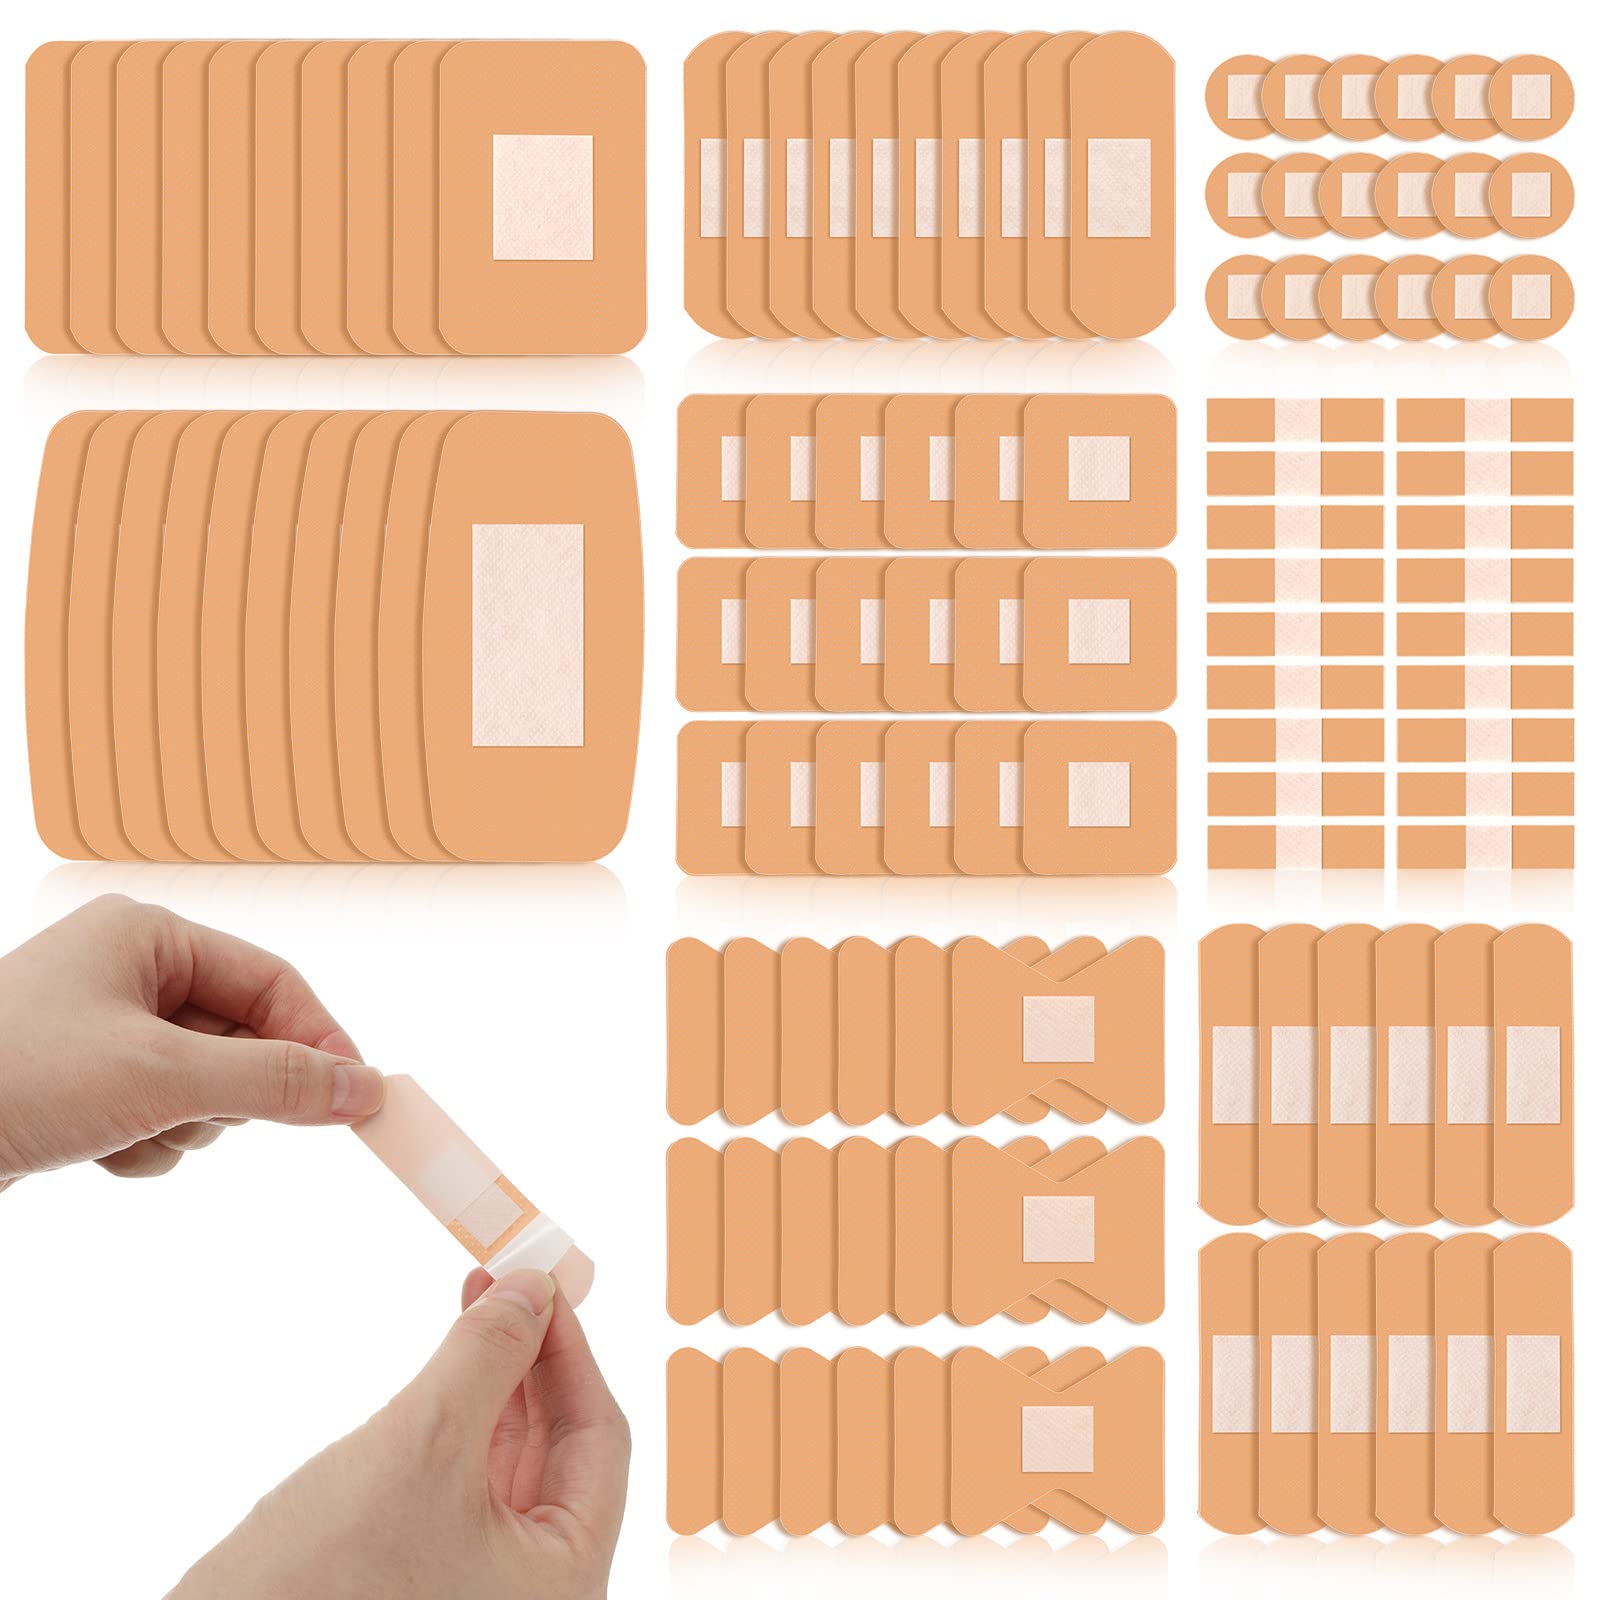 BBTO 400 Pcs Assorted Bandages Flexible Adhesive PE Bandages Knuckle  Bandages Waterproof Bandages for Wound Aid Recovery and Care Supplies (Cute  Style)